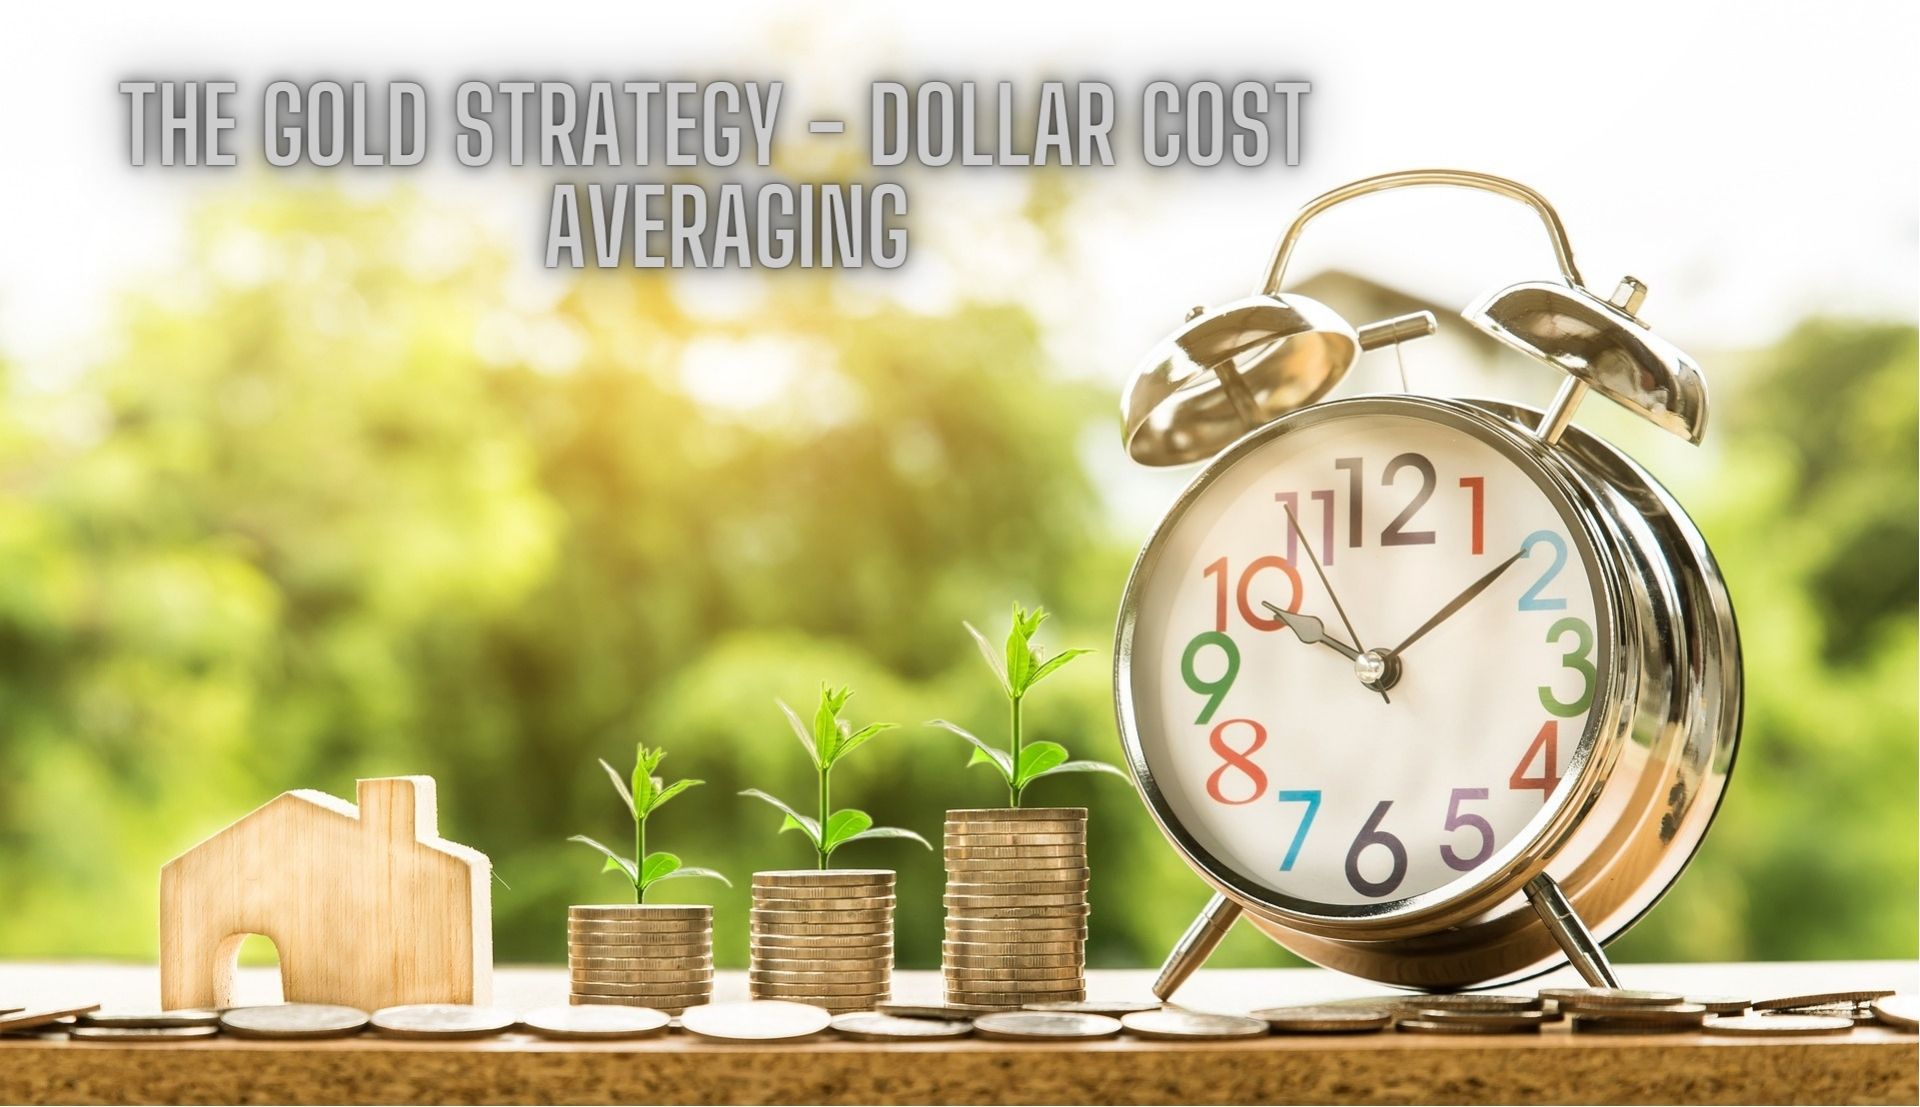 @tj4real1/the-gold-strategy-dollar-cost-averaging